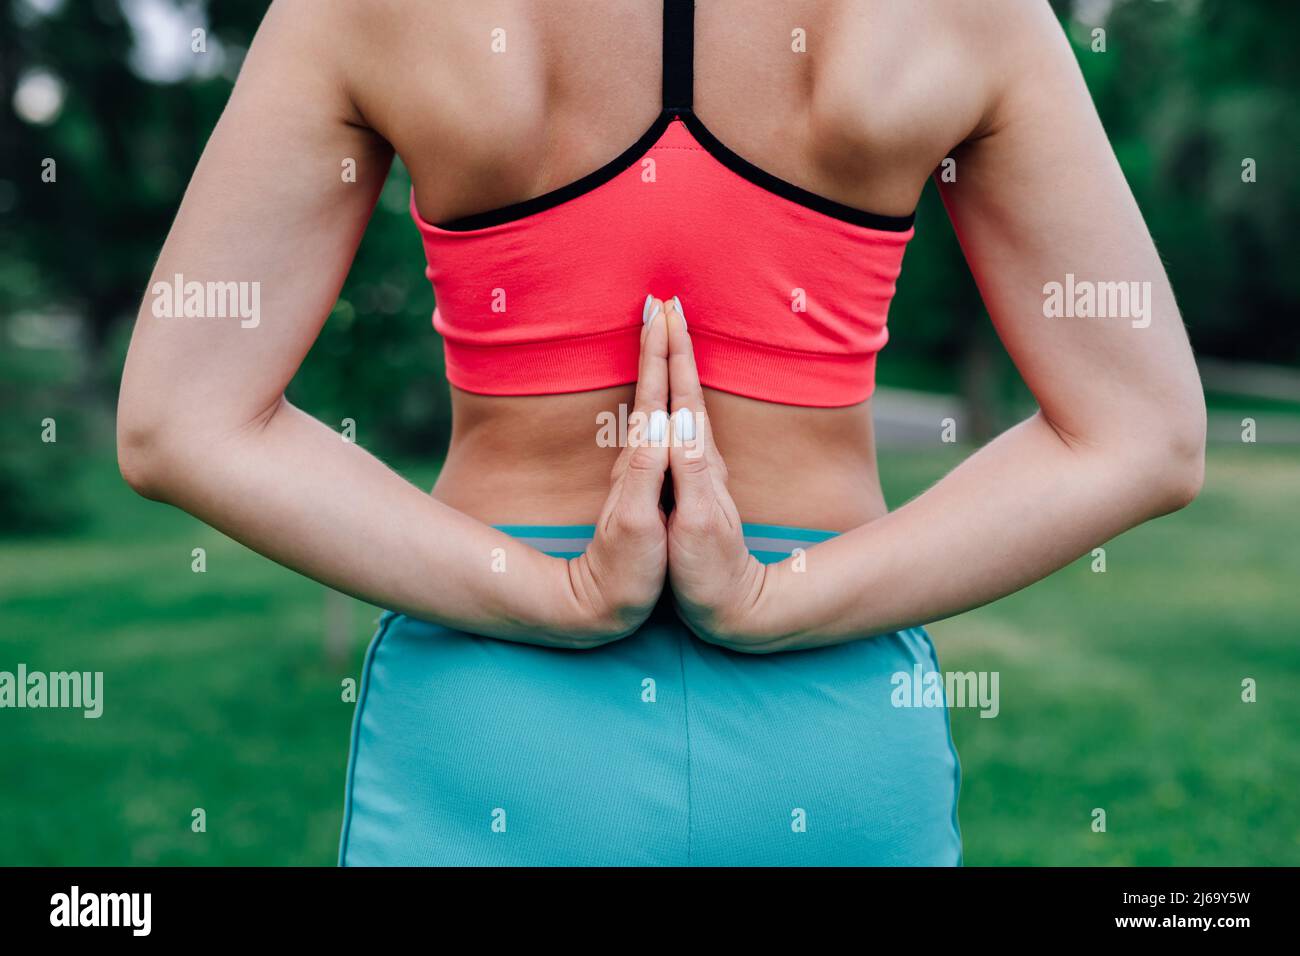 Exercises for proper posture. Body of young woman in pink top and blue sports trousers with her palms folded behind her back, standing in pose of Stock Photo